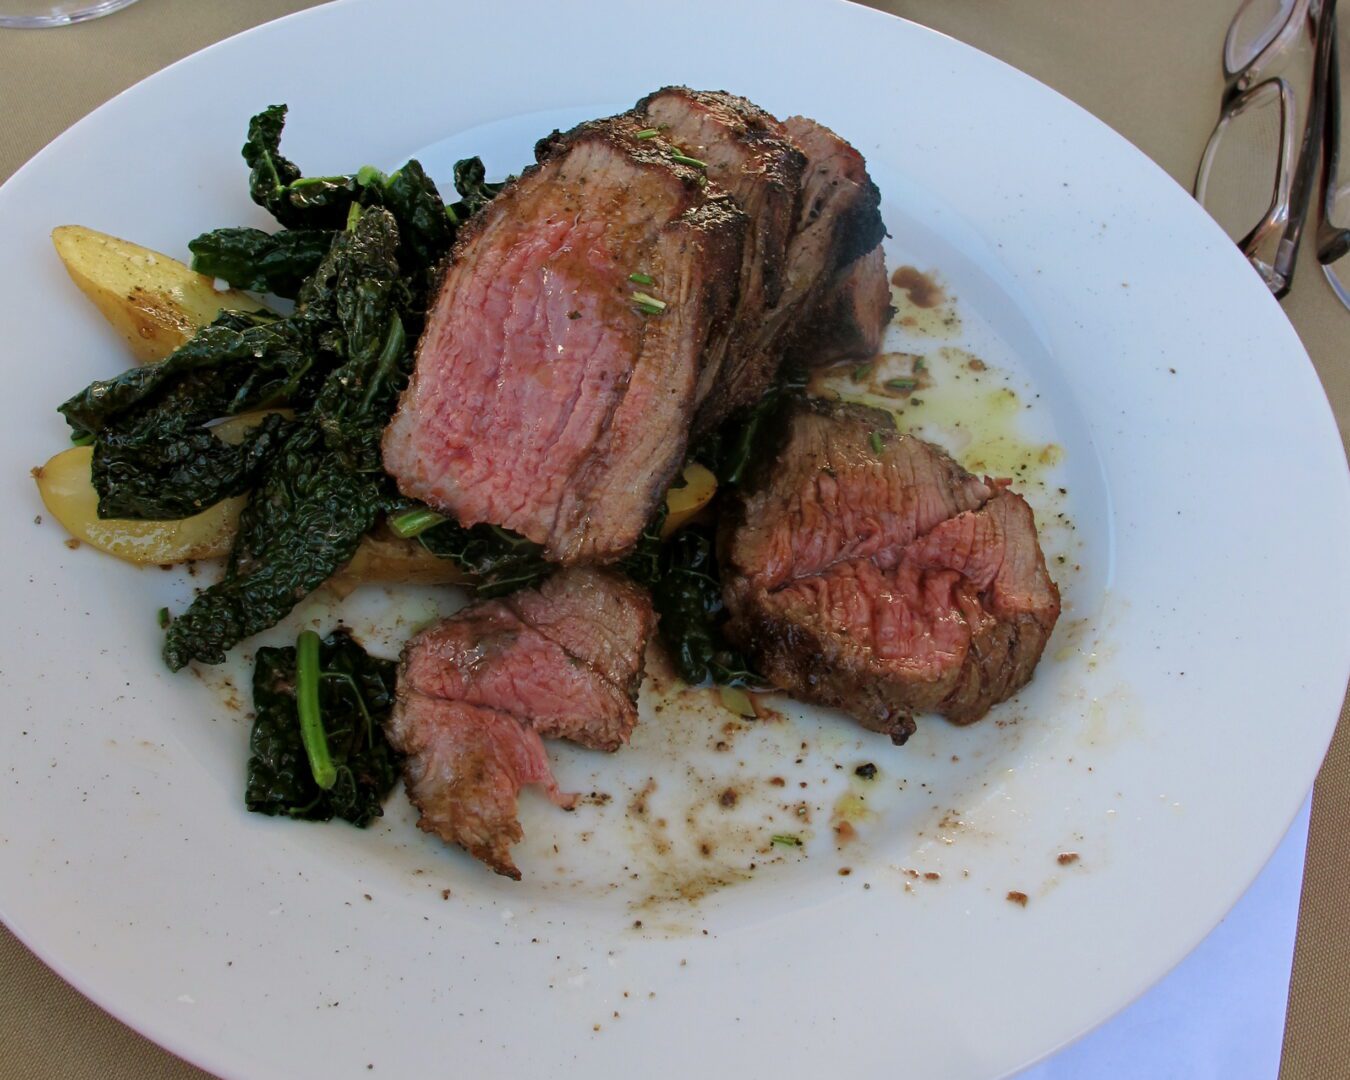 A plate of steak and greens on a table.